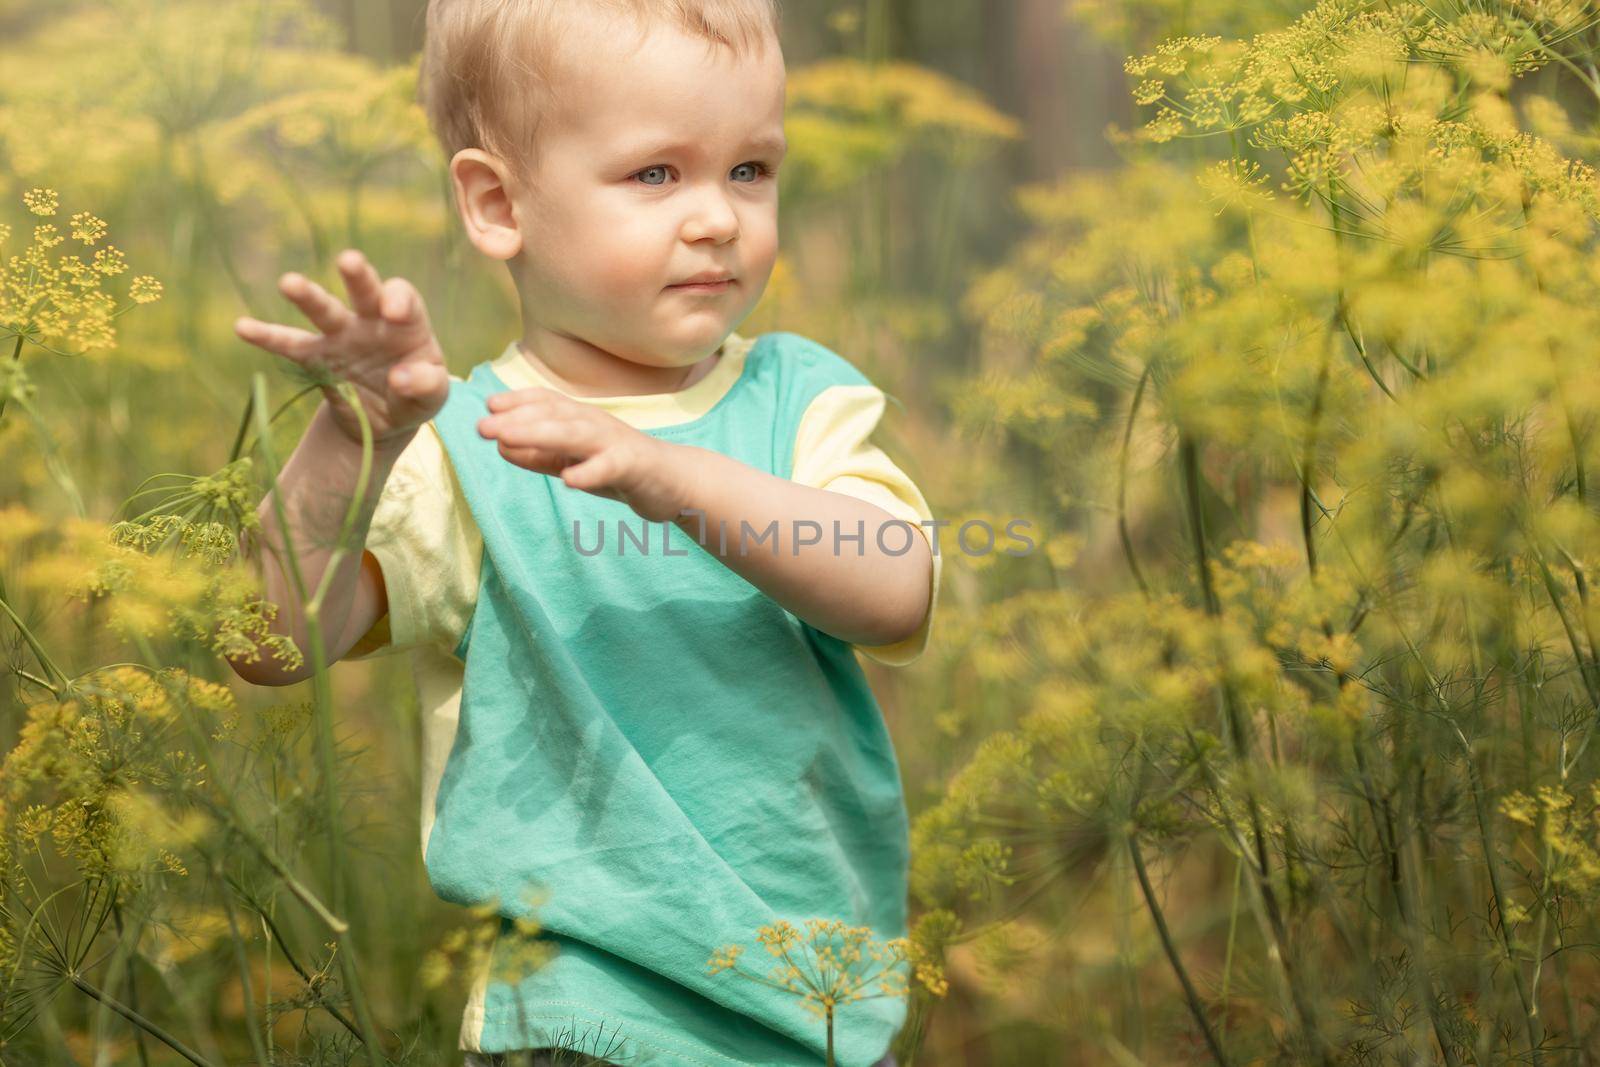 Grandson in grandma's garden during summer vacation, learns to explore nature.